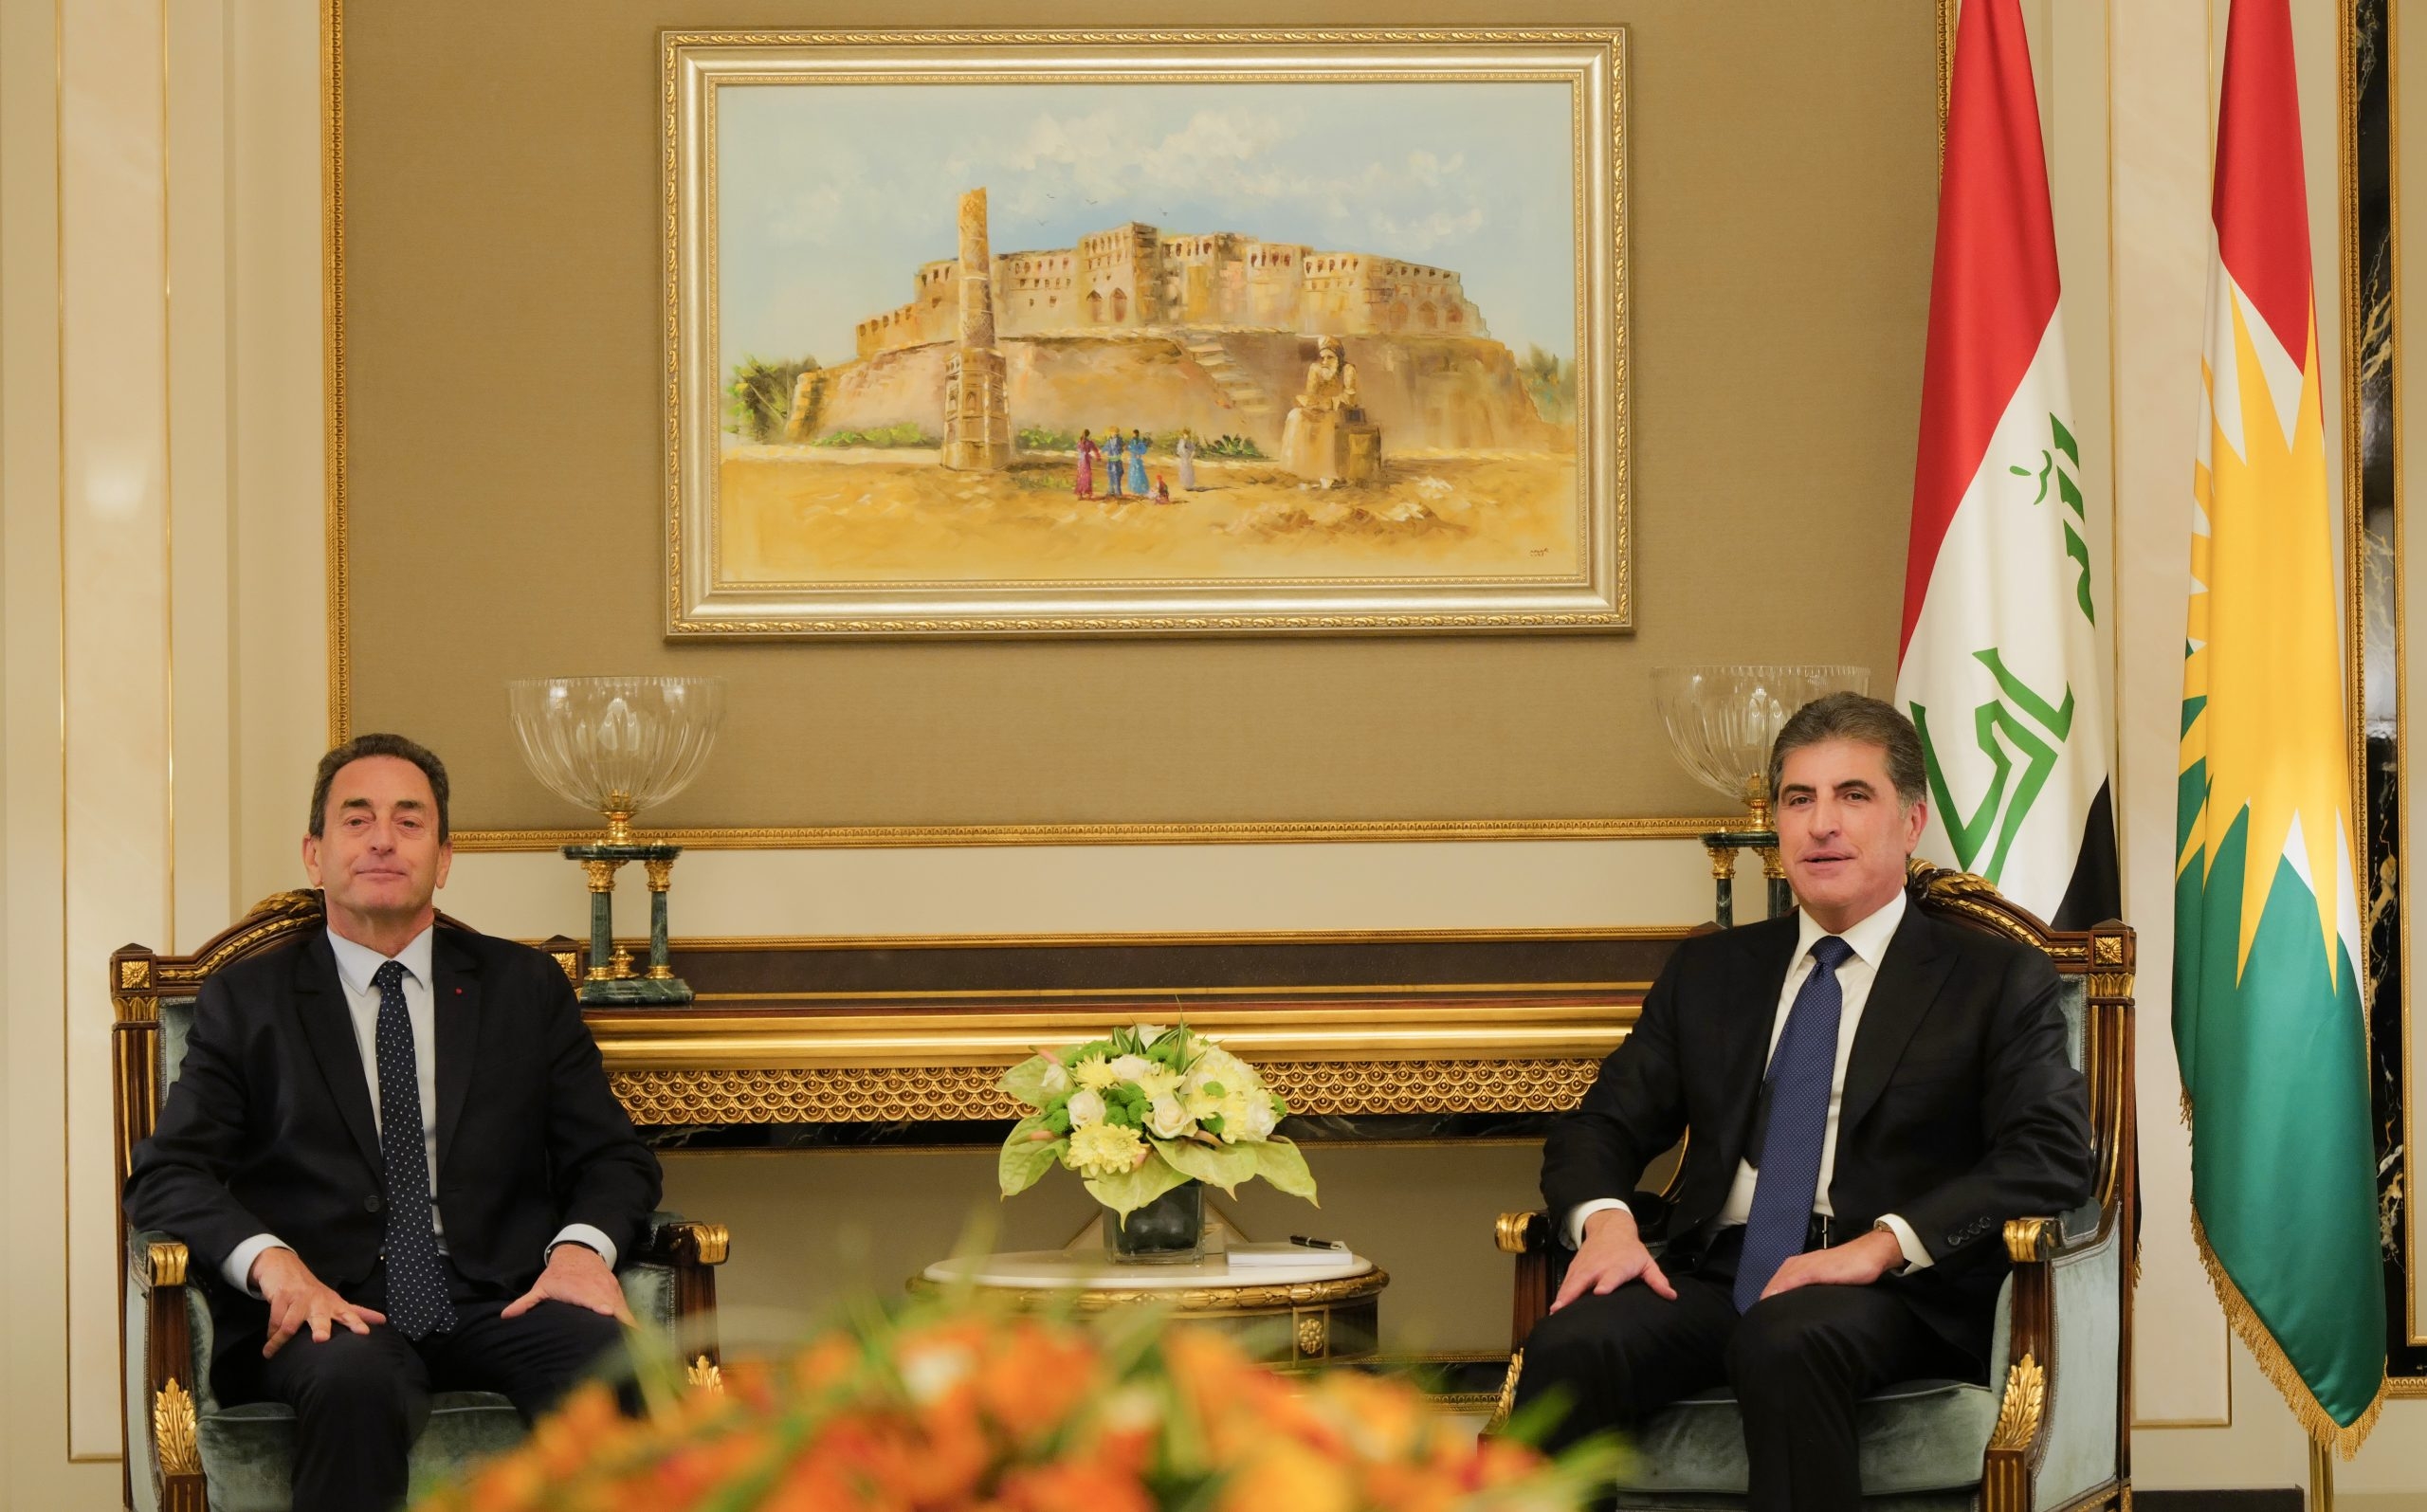 President Nechirvan Barzani and French Ambassador Discuss Ongoing Erbil-Baghdad Talks and Bilateral Cooperation